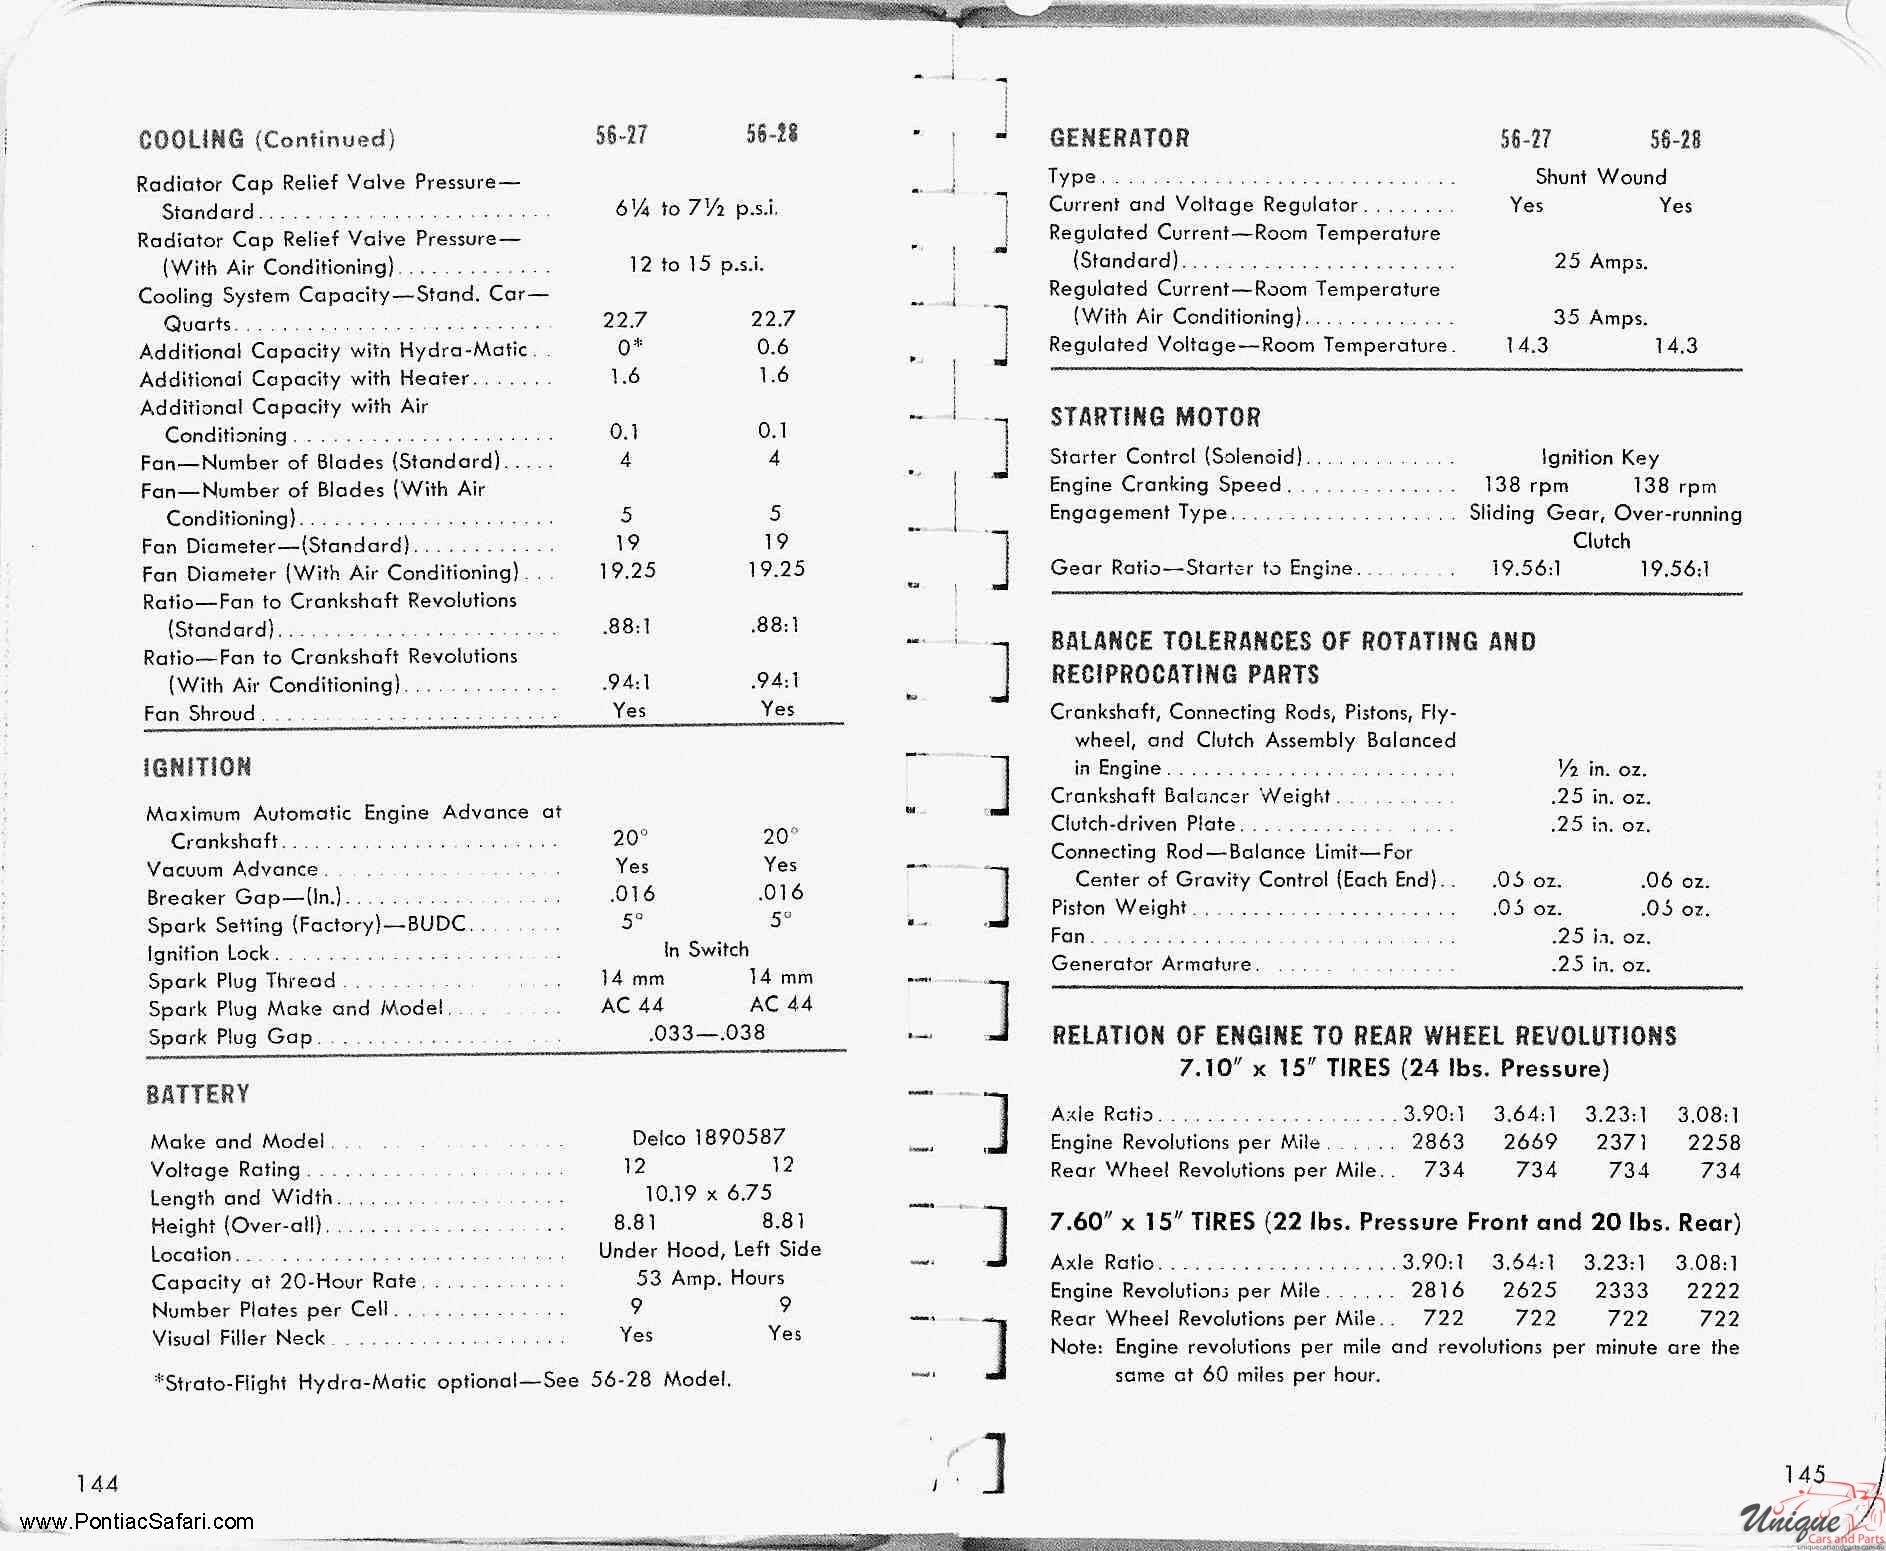 1956 Pontiac Facts Book Page 27